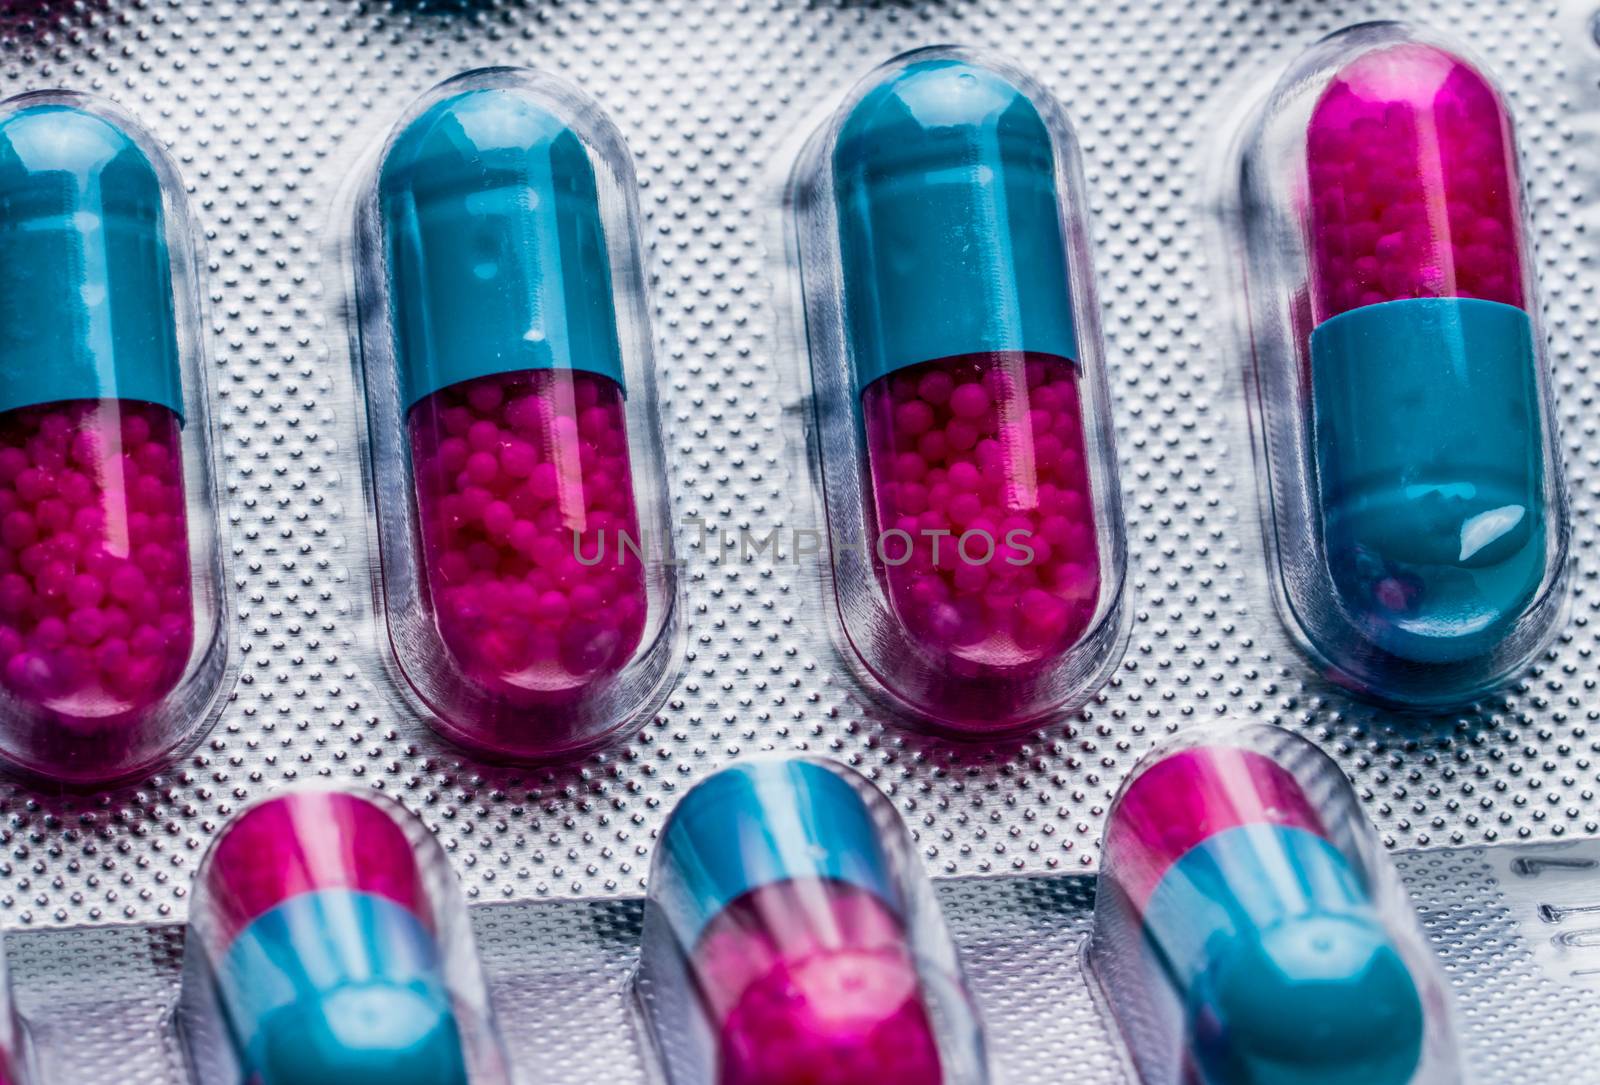 Macro shot detail of blue, pink capsule with granule in side pills. Pills in blister pack. Pharmaceutical dosage form and packaging. Itraconazole 100 mg : Anti-fungal medicine. Pharmaceutical industry. Pharmacy background. Global healthcare concept. by Fahroni